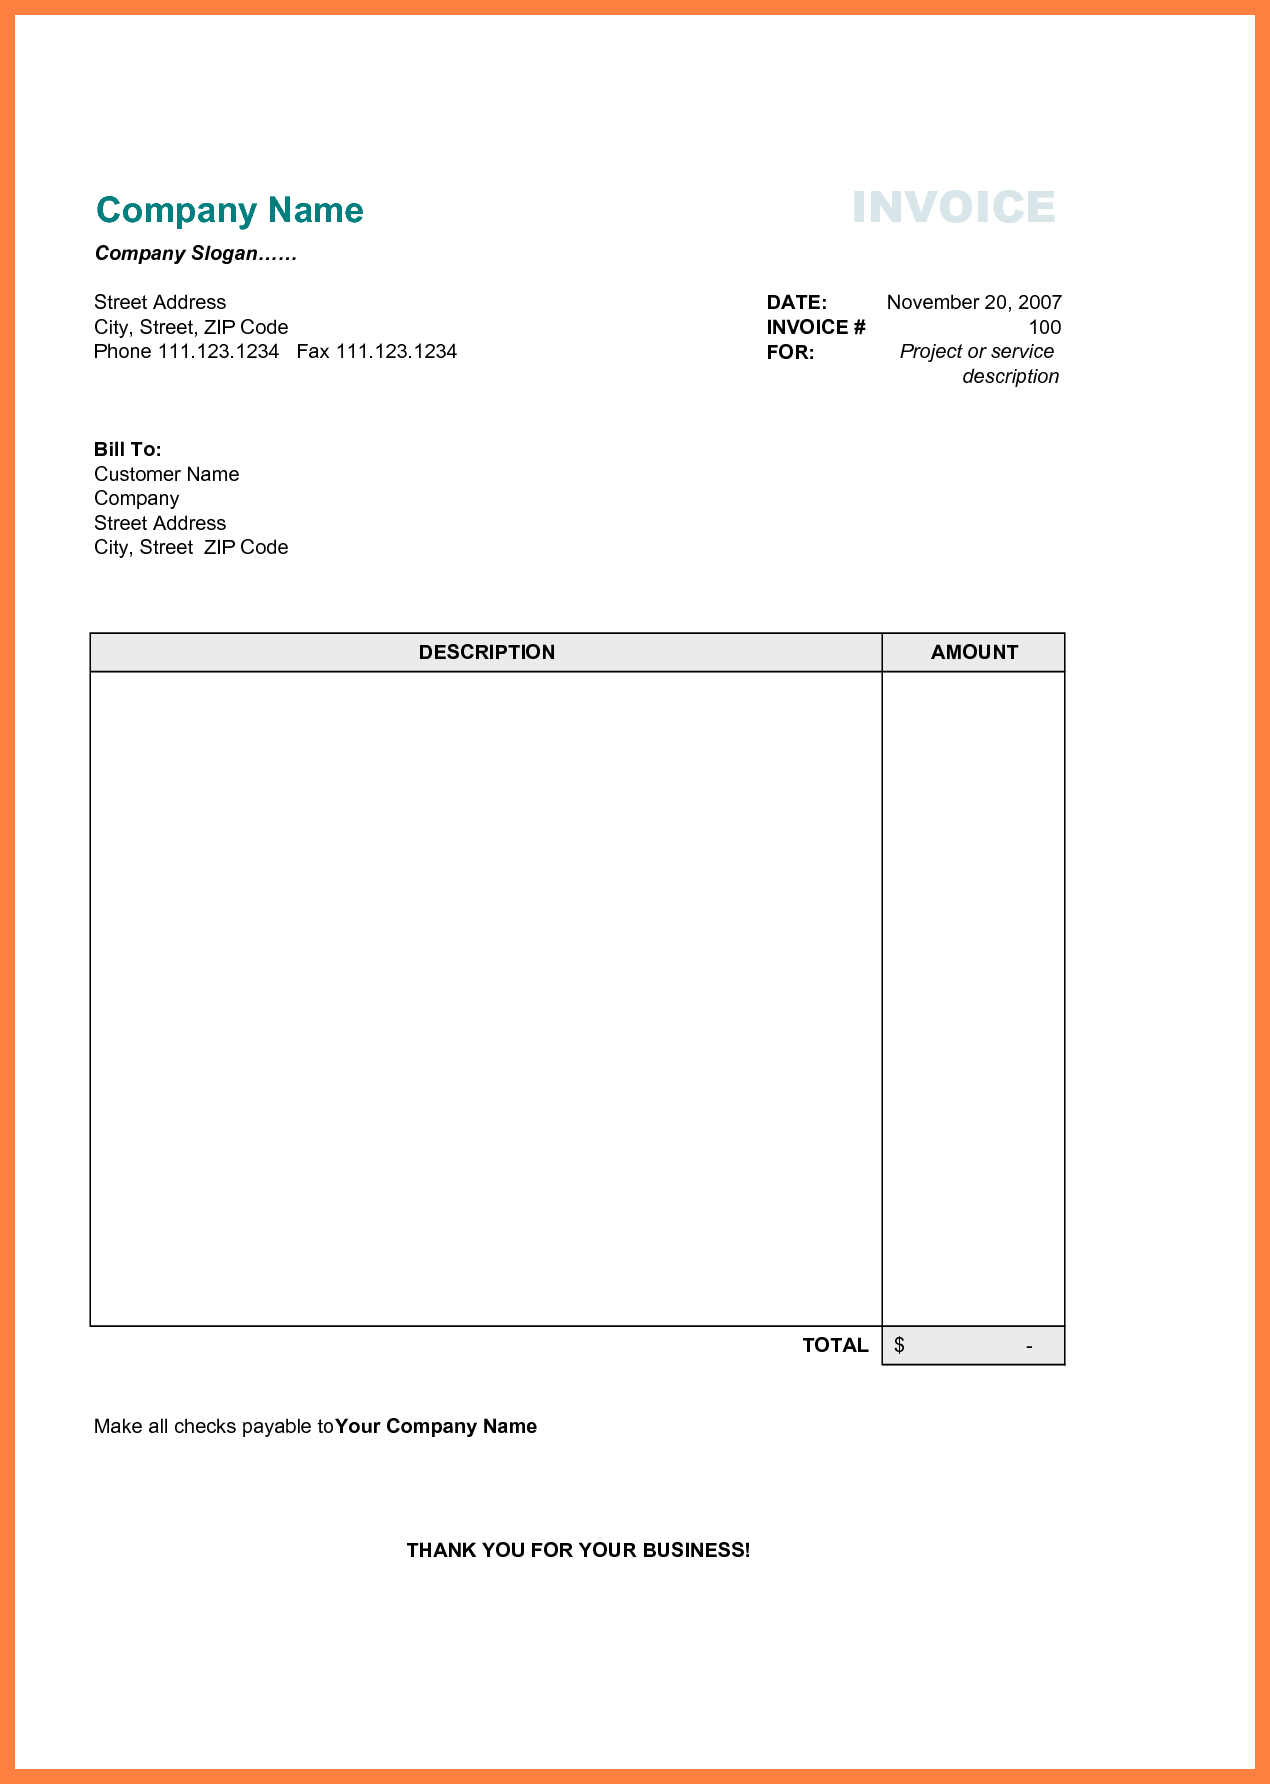 Free Printable Business Invoice Template - Invoice Format In Excel - Free Bill Invoice Template Printable